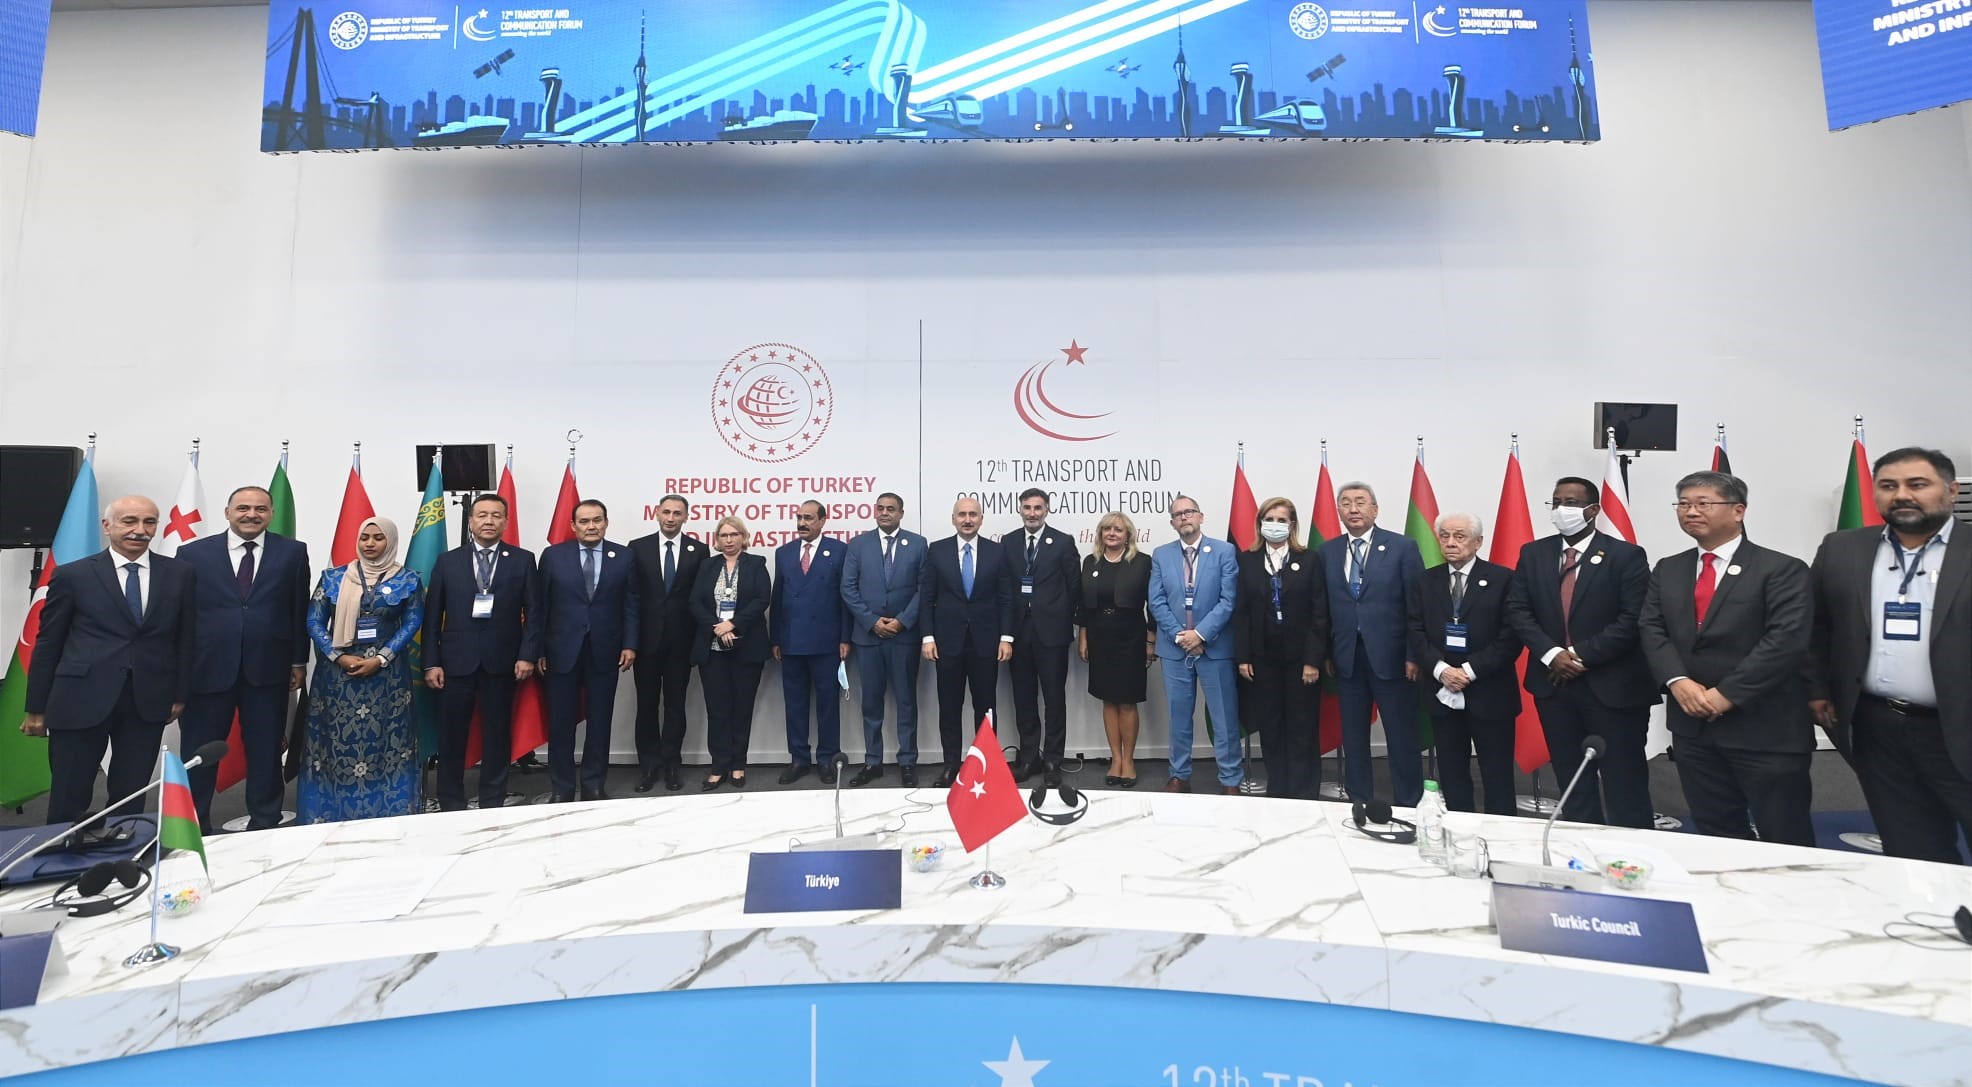 IRU Secretary General Umberto de Pretto has addressed 14 ministers of transport in a closed door round table session during the 12th Transport and Communication Forum, hosted by the Turkish Ministry of Transport